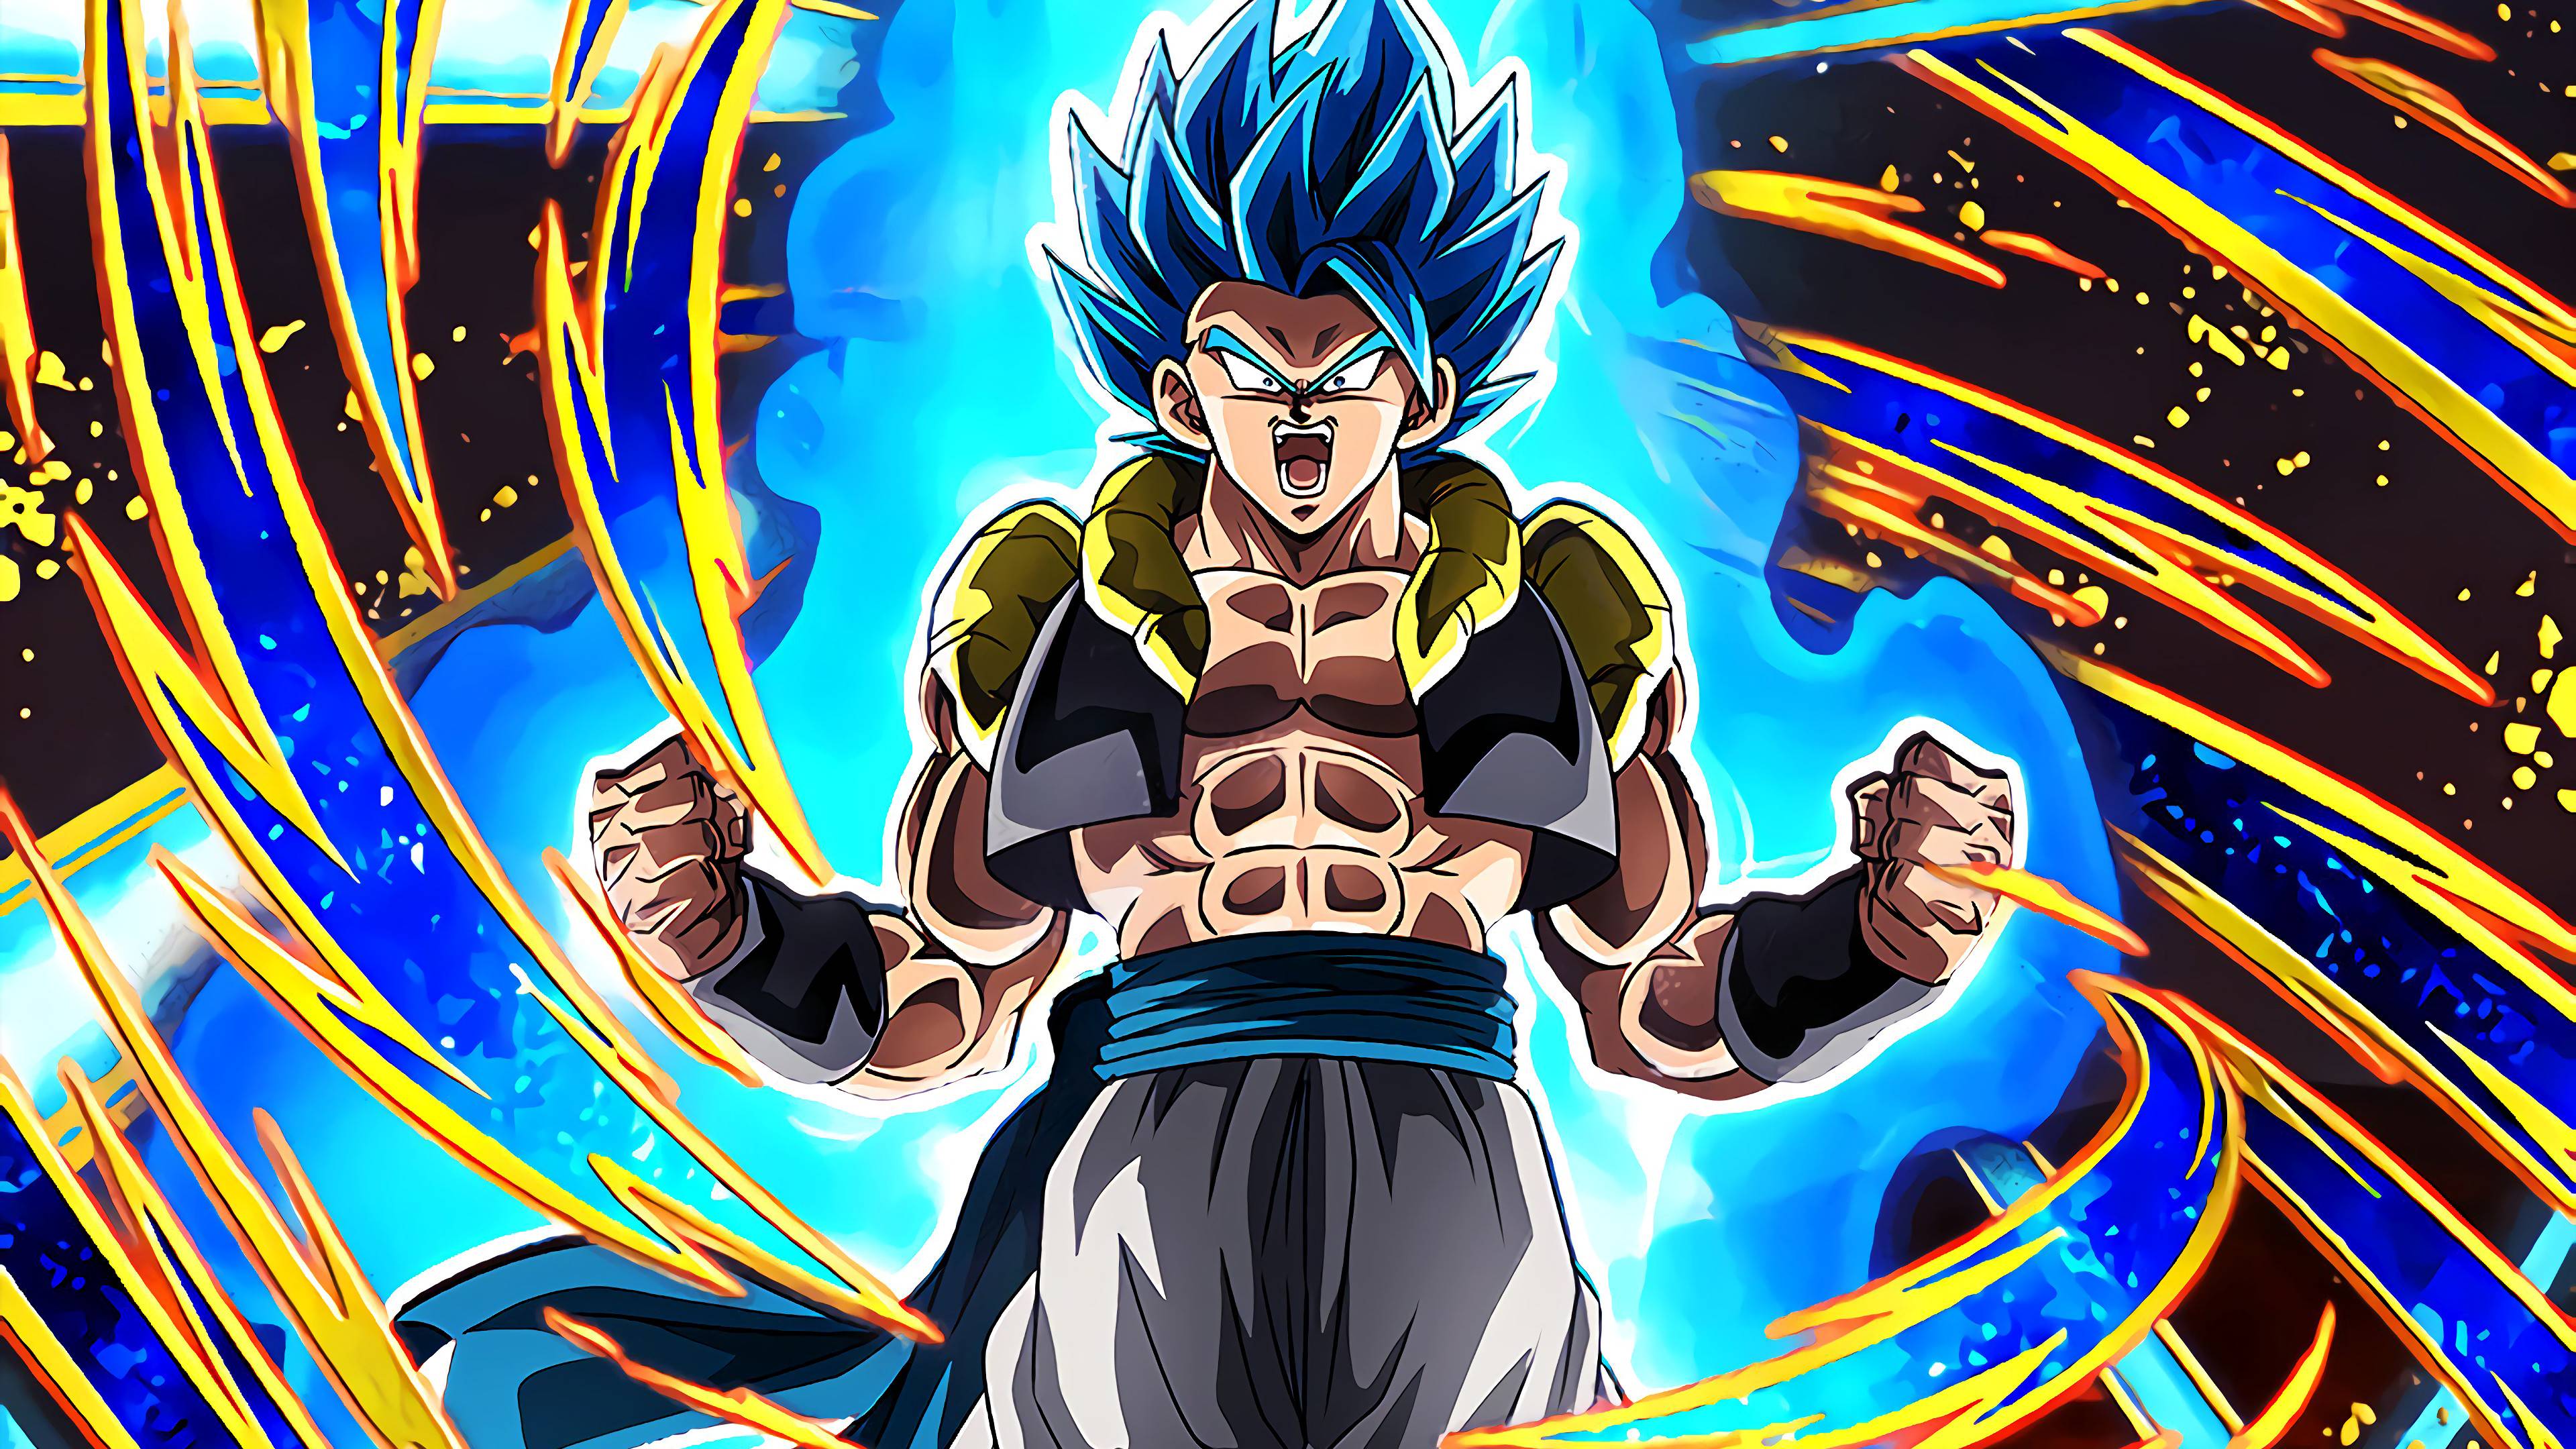 Gogeta blue  Mobile Abyss